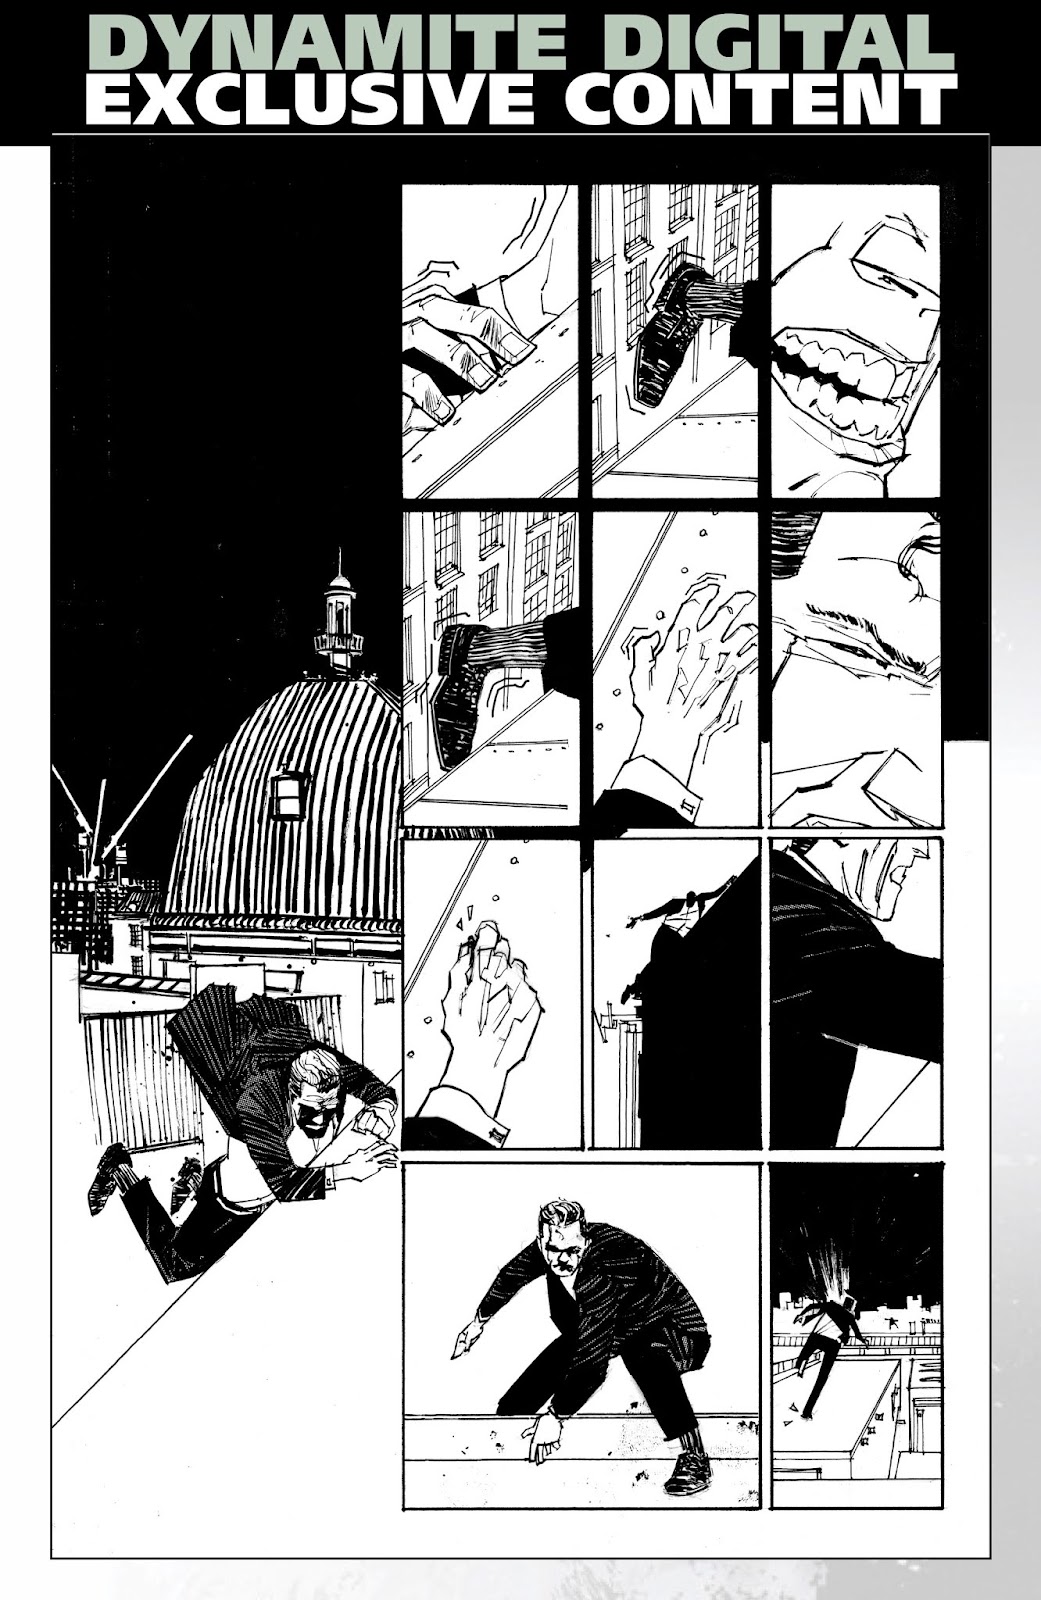 James Bond: The Body issue 5 - Page 25